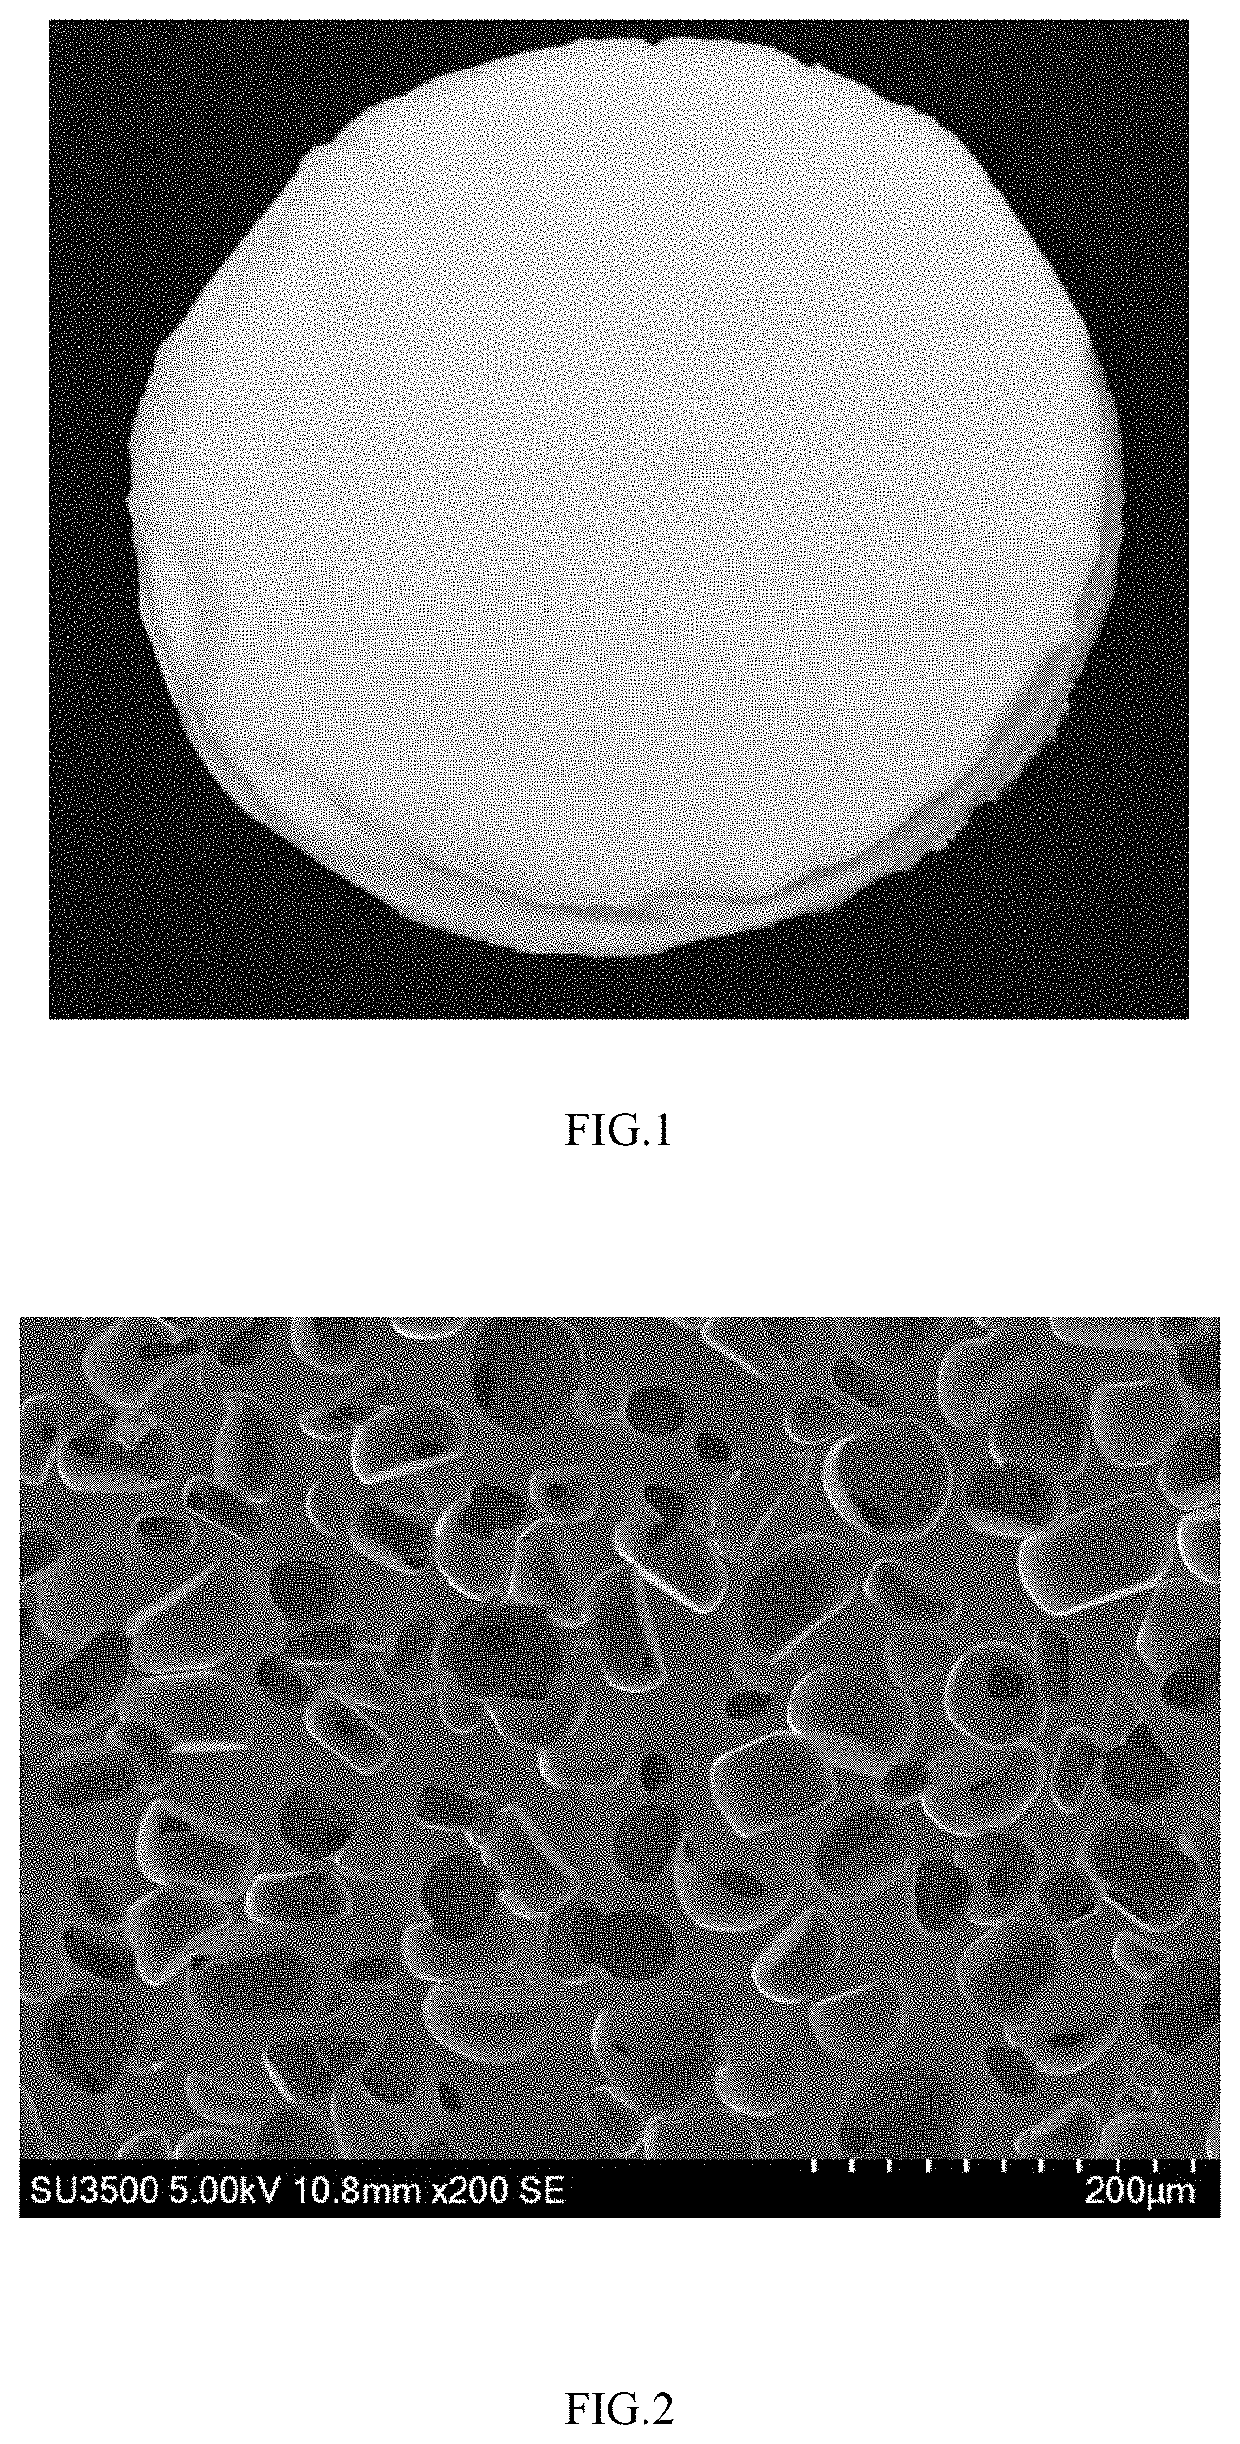 Method to prepare polymer materials with interlocked porous structures by freezing and demulsification of emulsion